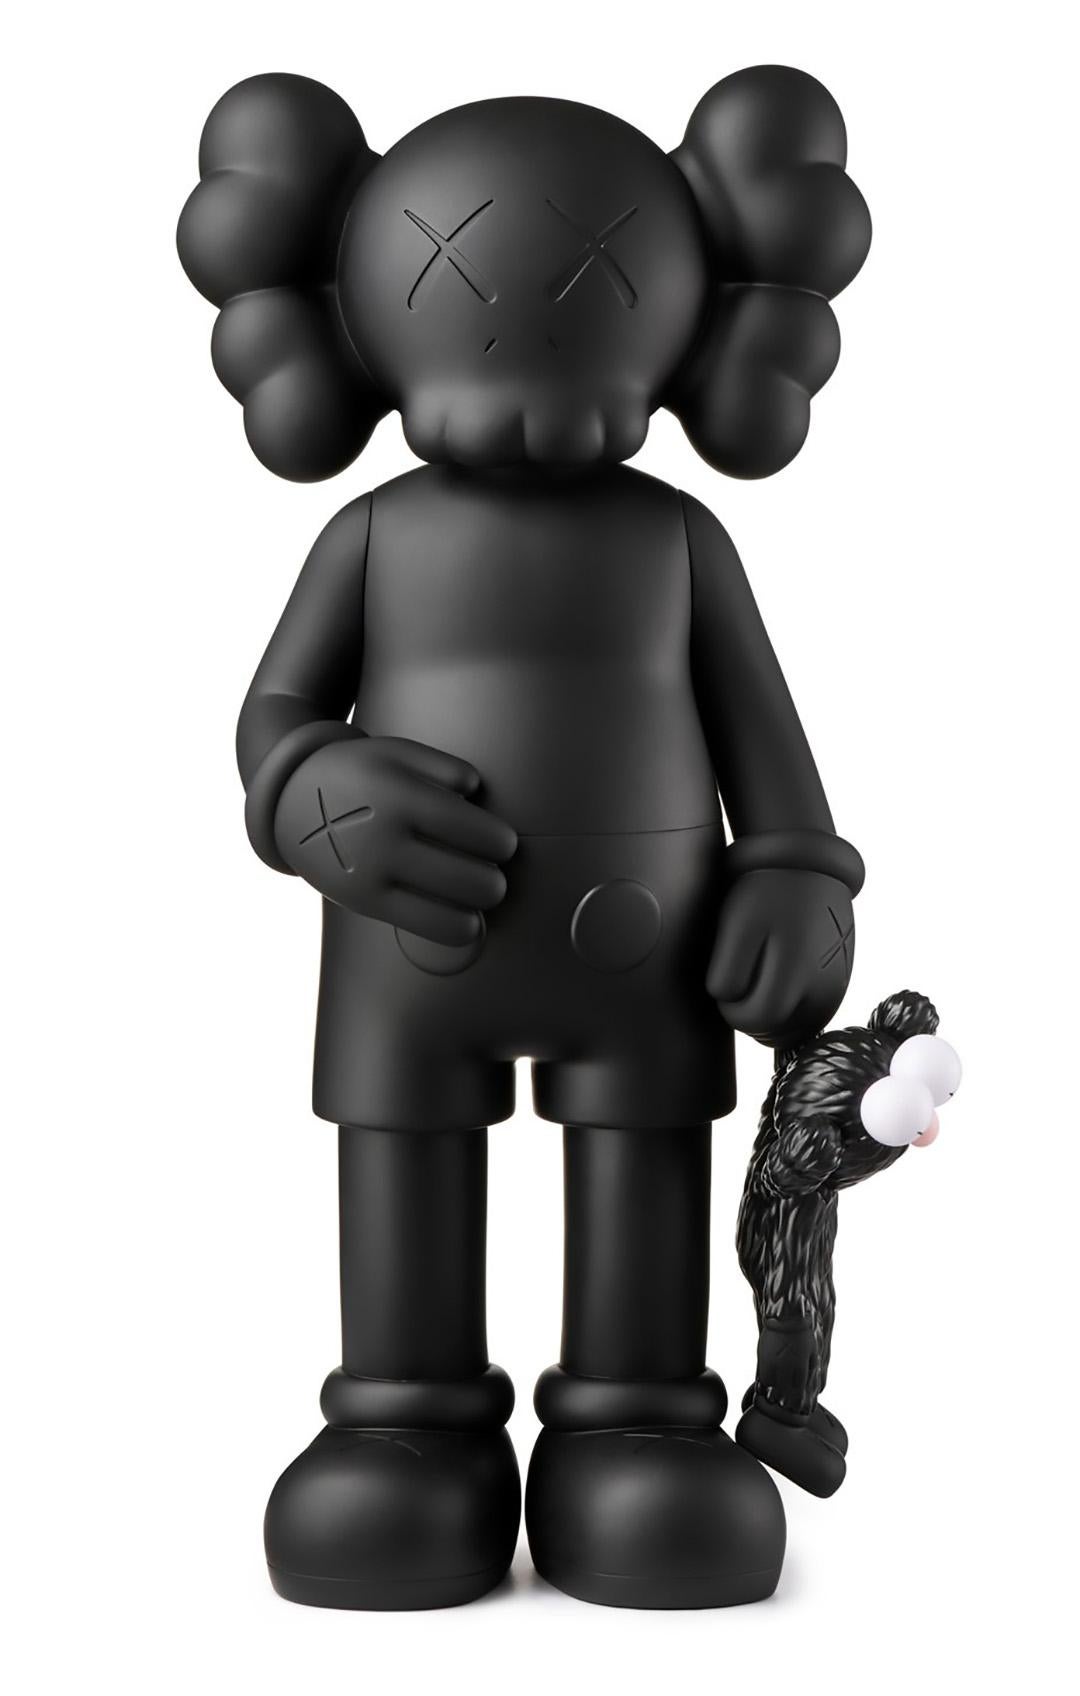 KAWS SHARE: Set of 2; Brown & Black; each new & unopened in its original packaging. 
KAWS SHARE first appeared in 'BLACKOUT' – the first London solo exhibition by KAWS (Skarstedt London 2019). In SHARE, KAWS uses two of his characters to convey